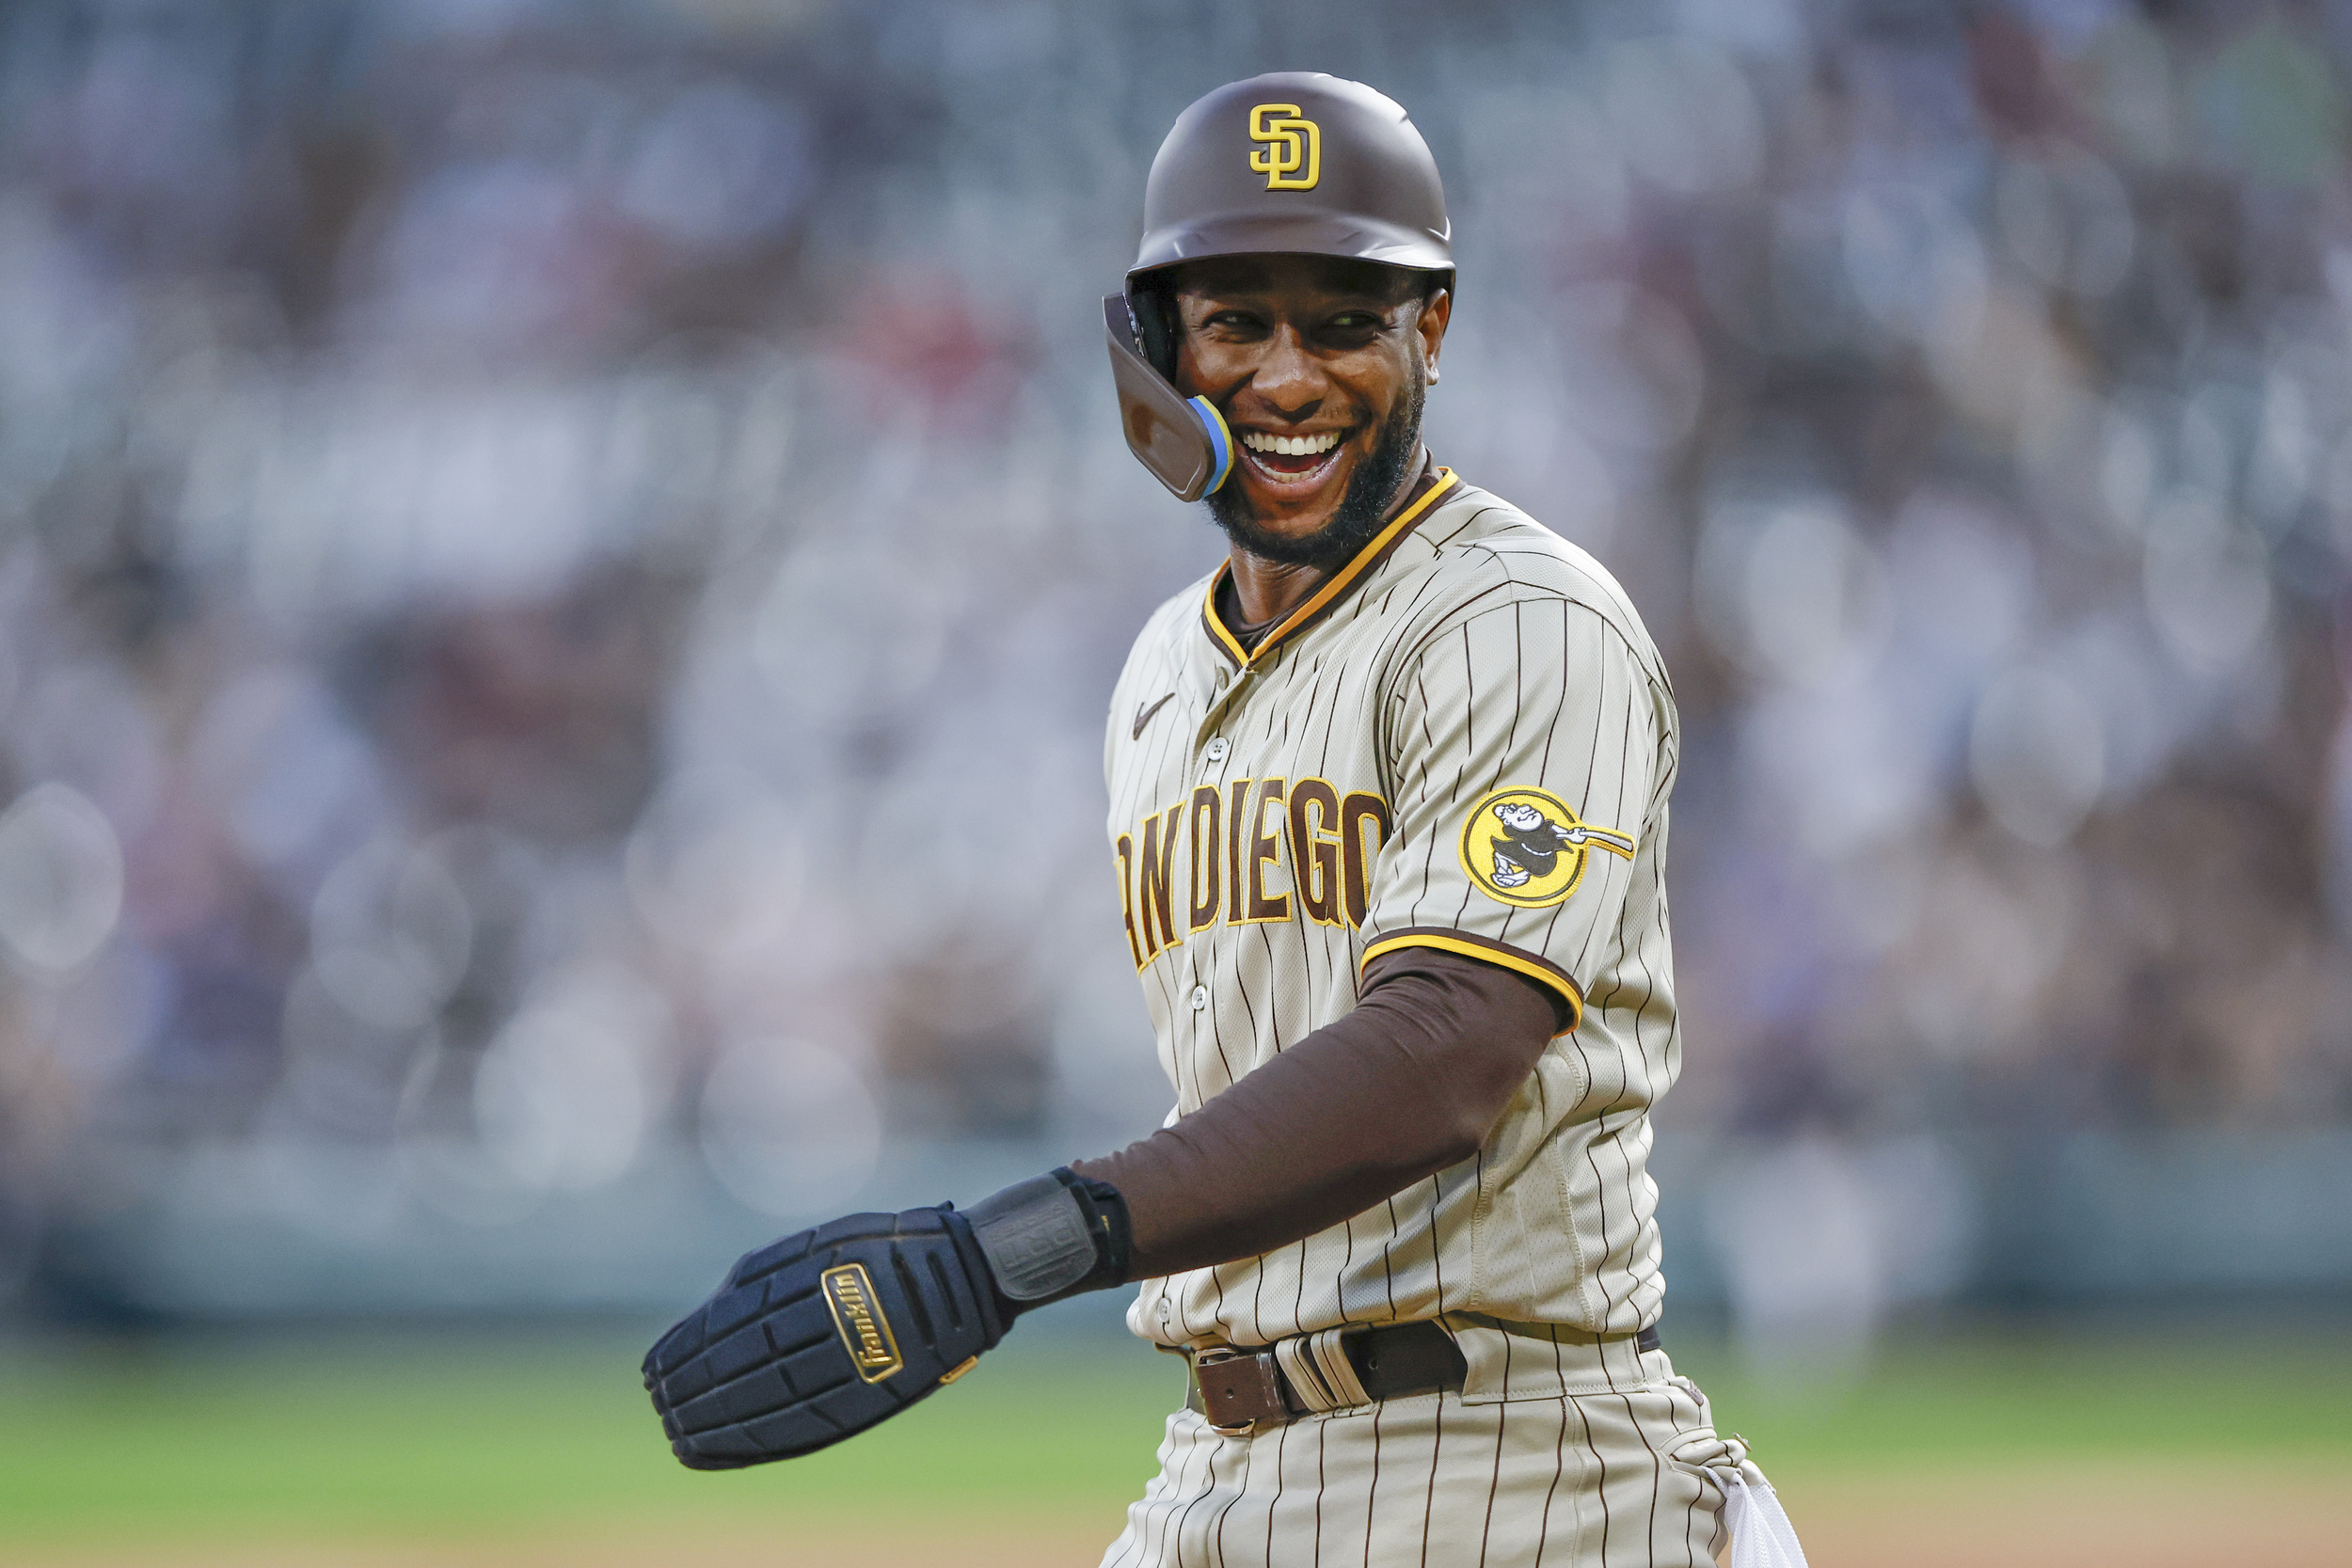 padres re-sign utility player